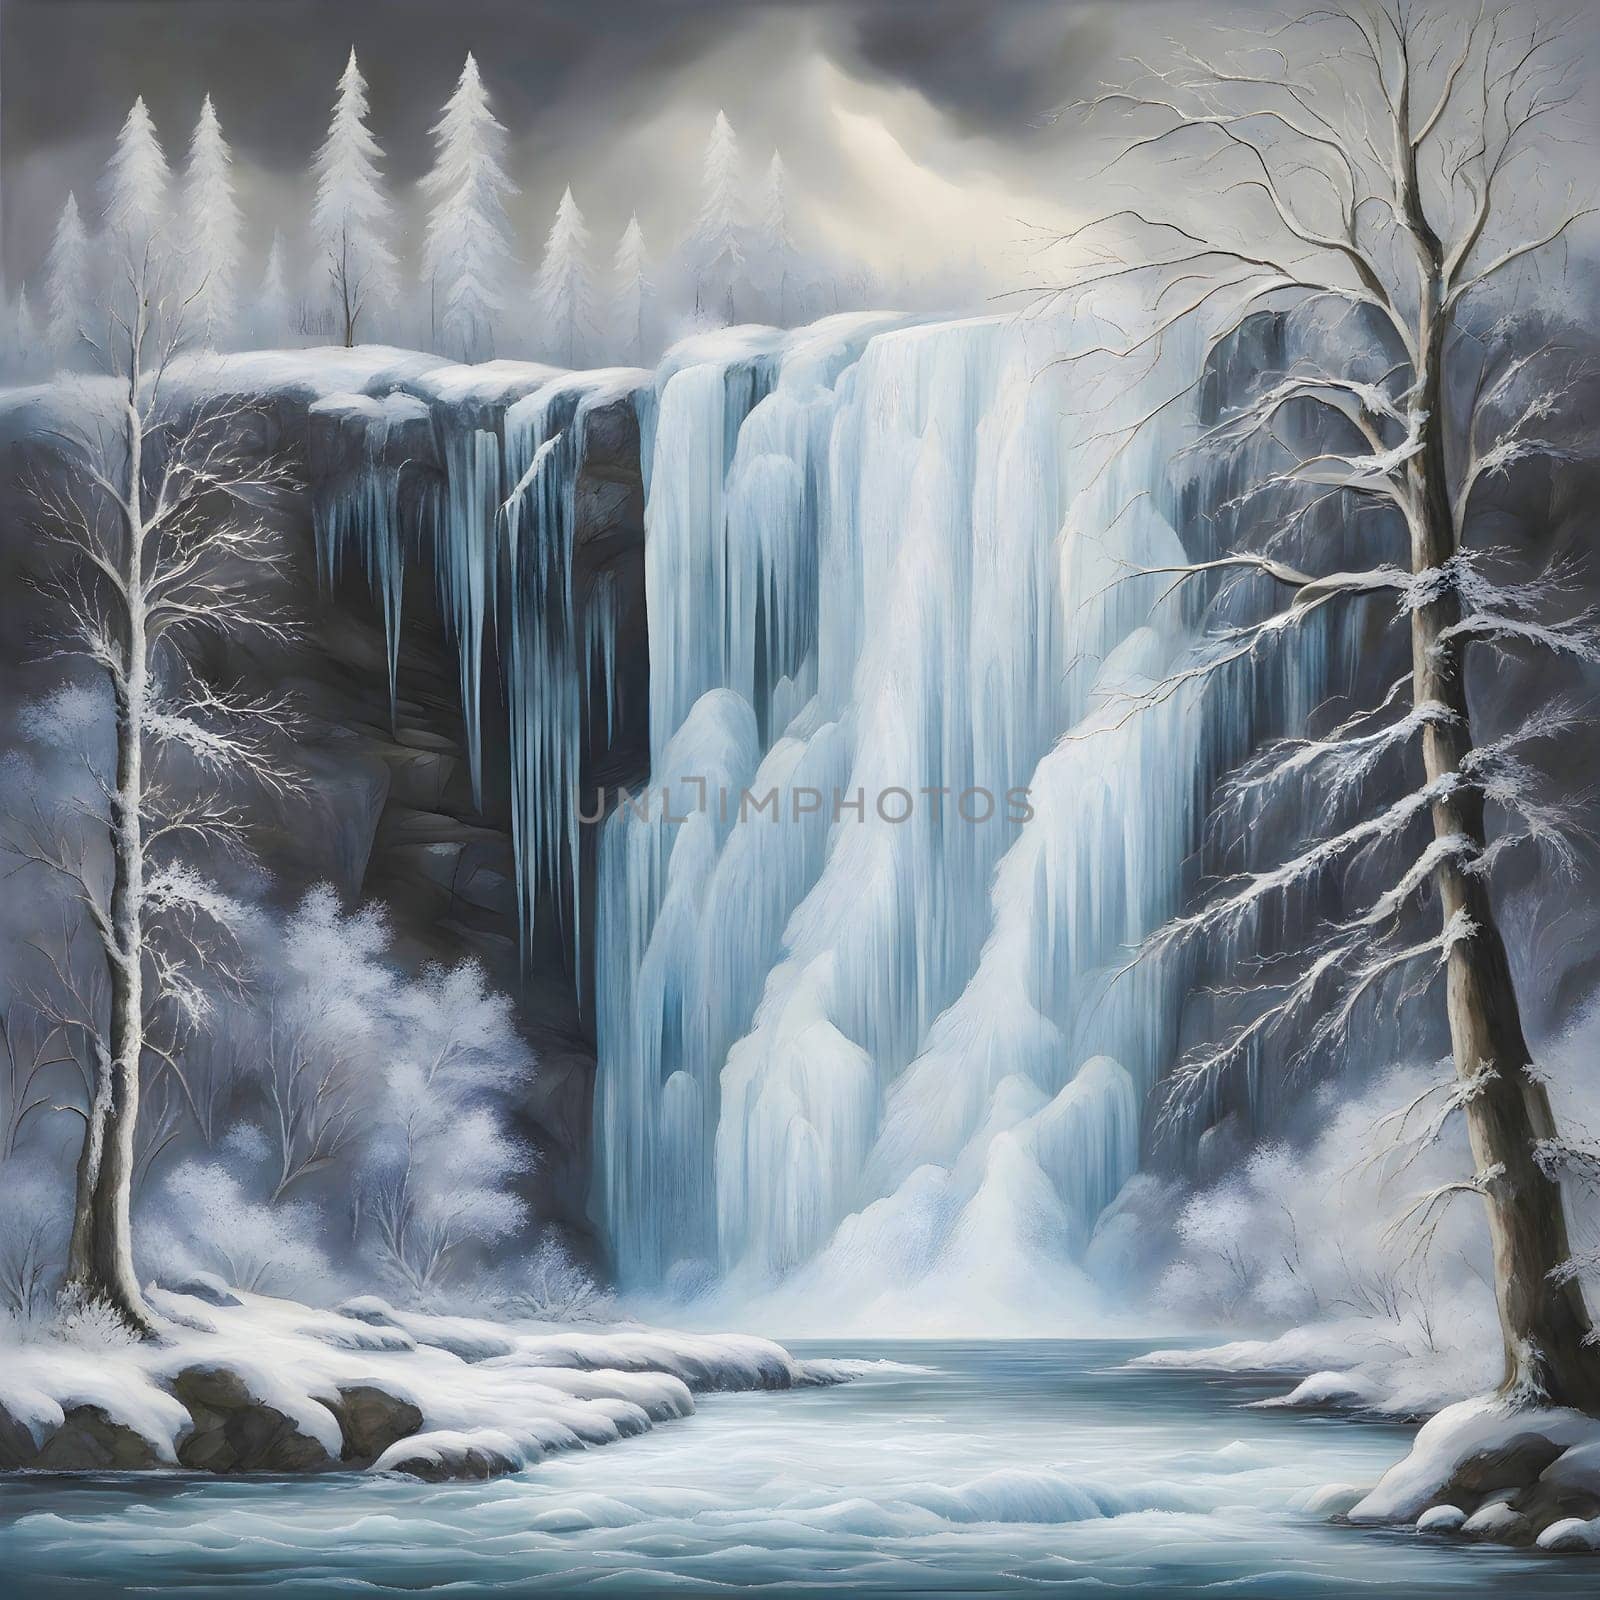 This beautiful illustration shows an icy waterfall in winter. The waterfall is tall and narrow, and its streams of water are icy and sharp. by rostik924